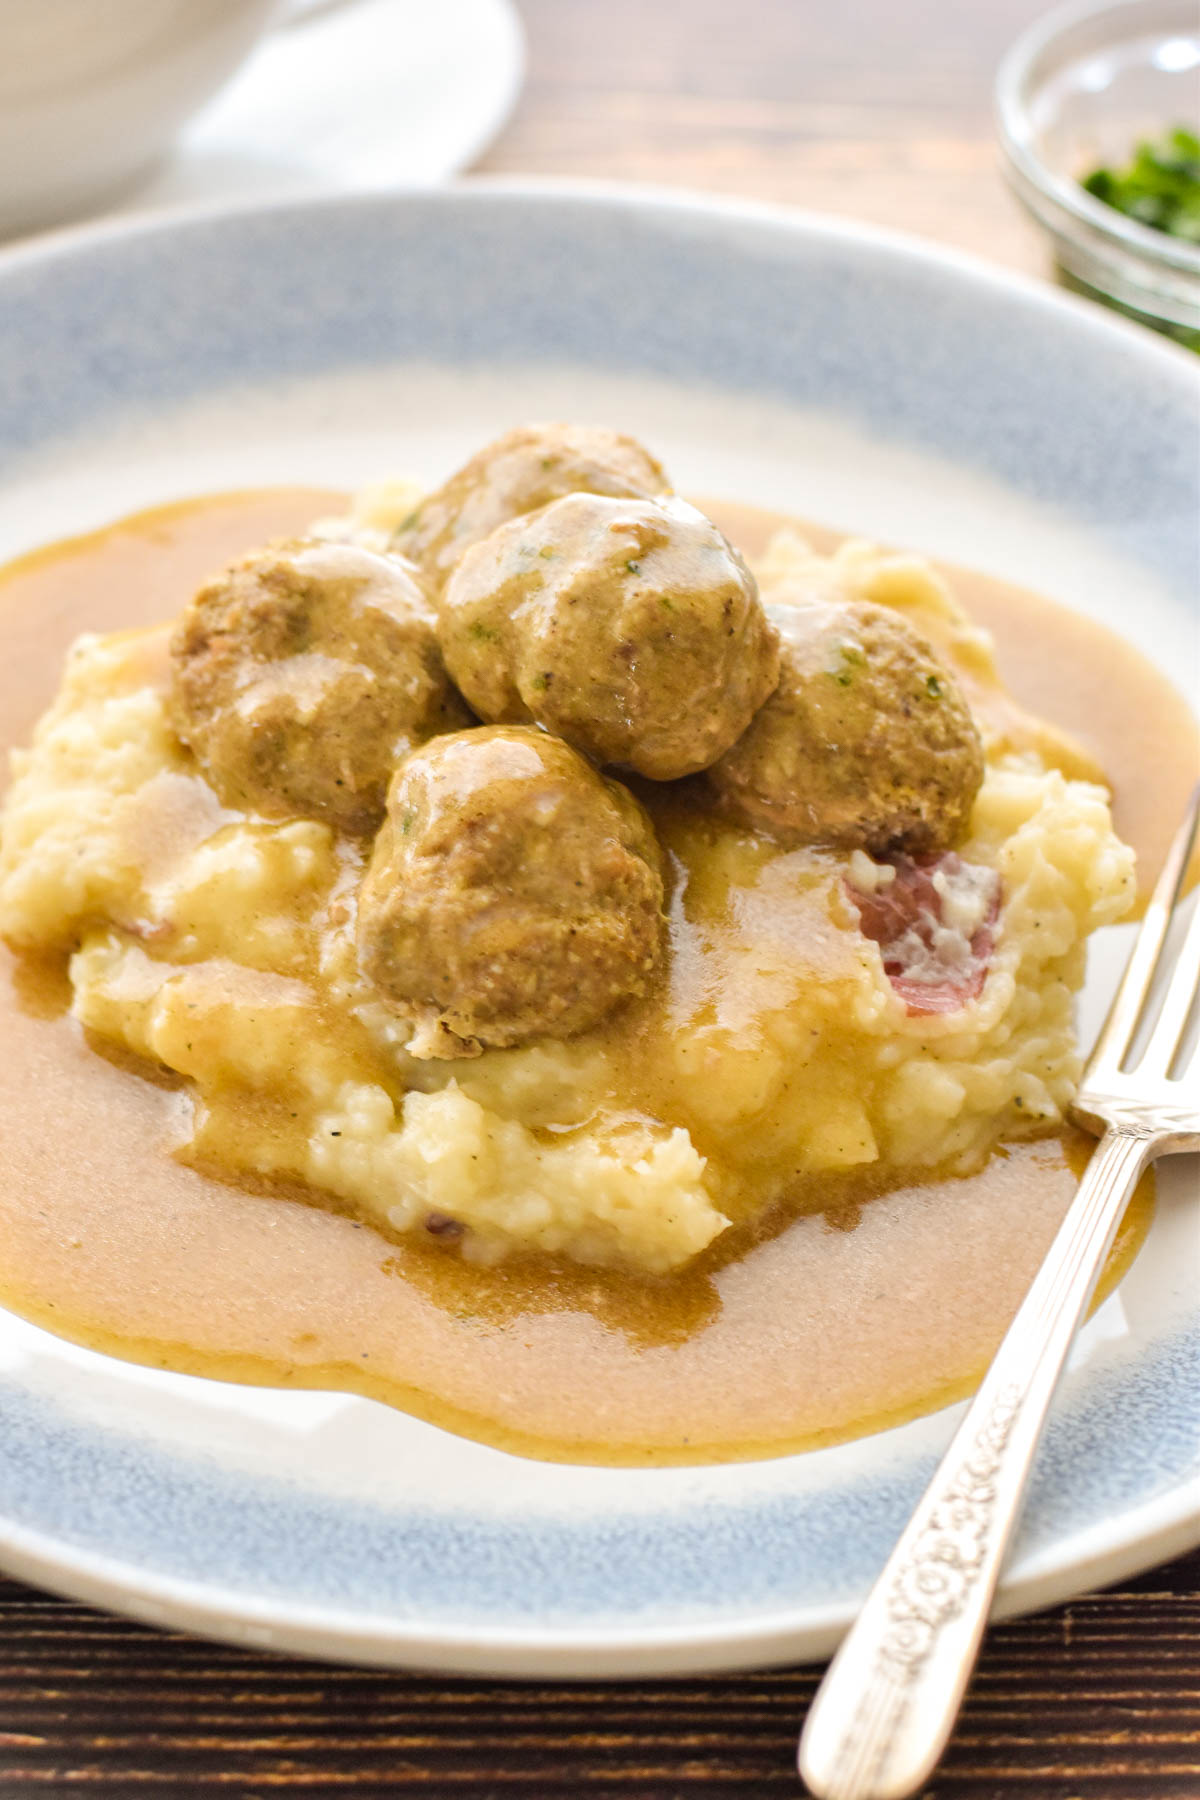 low fodmap meatballs and mashed potatoes covered in gravy on a blue and white plate with a fork